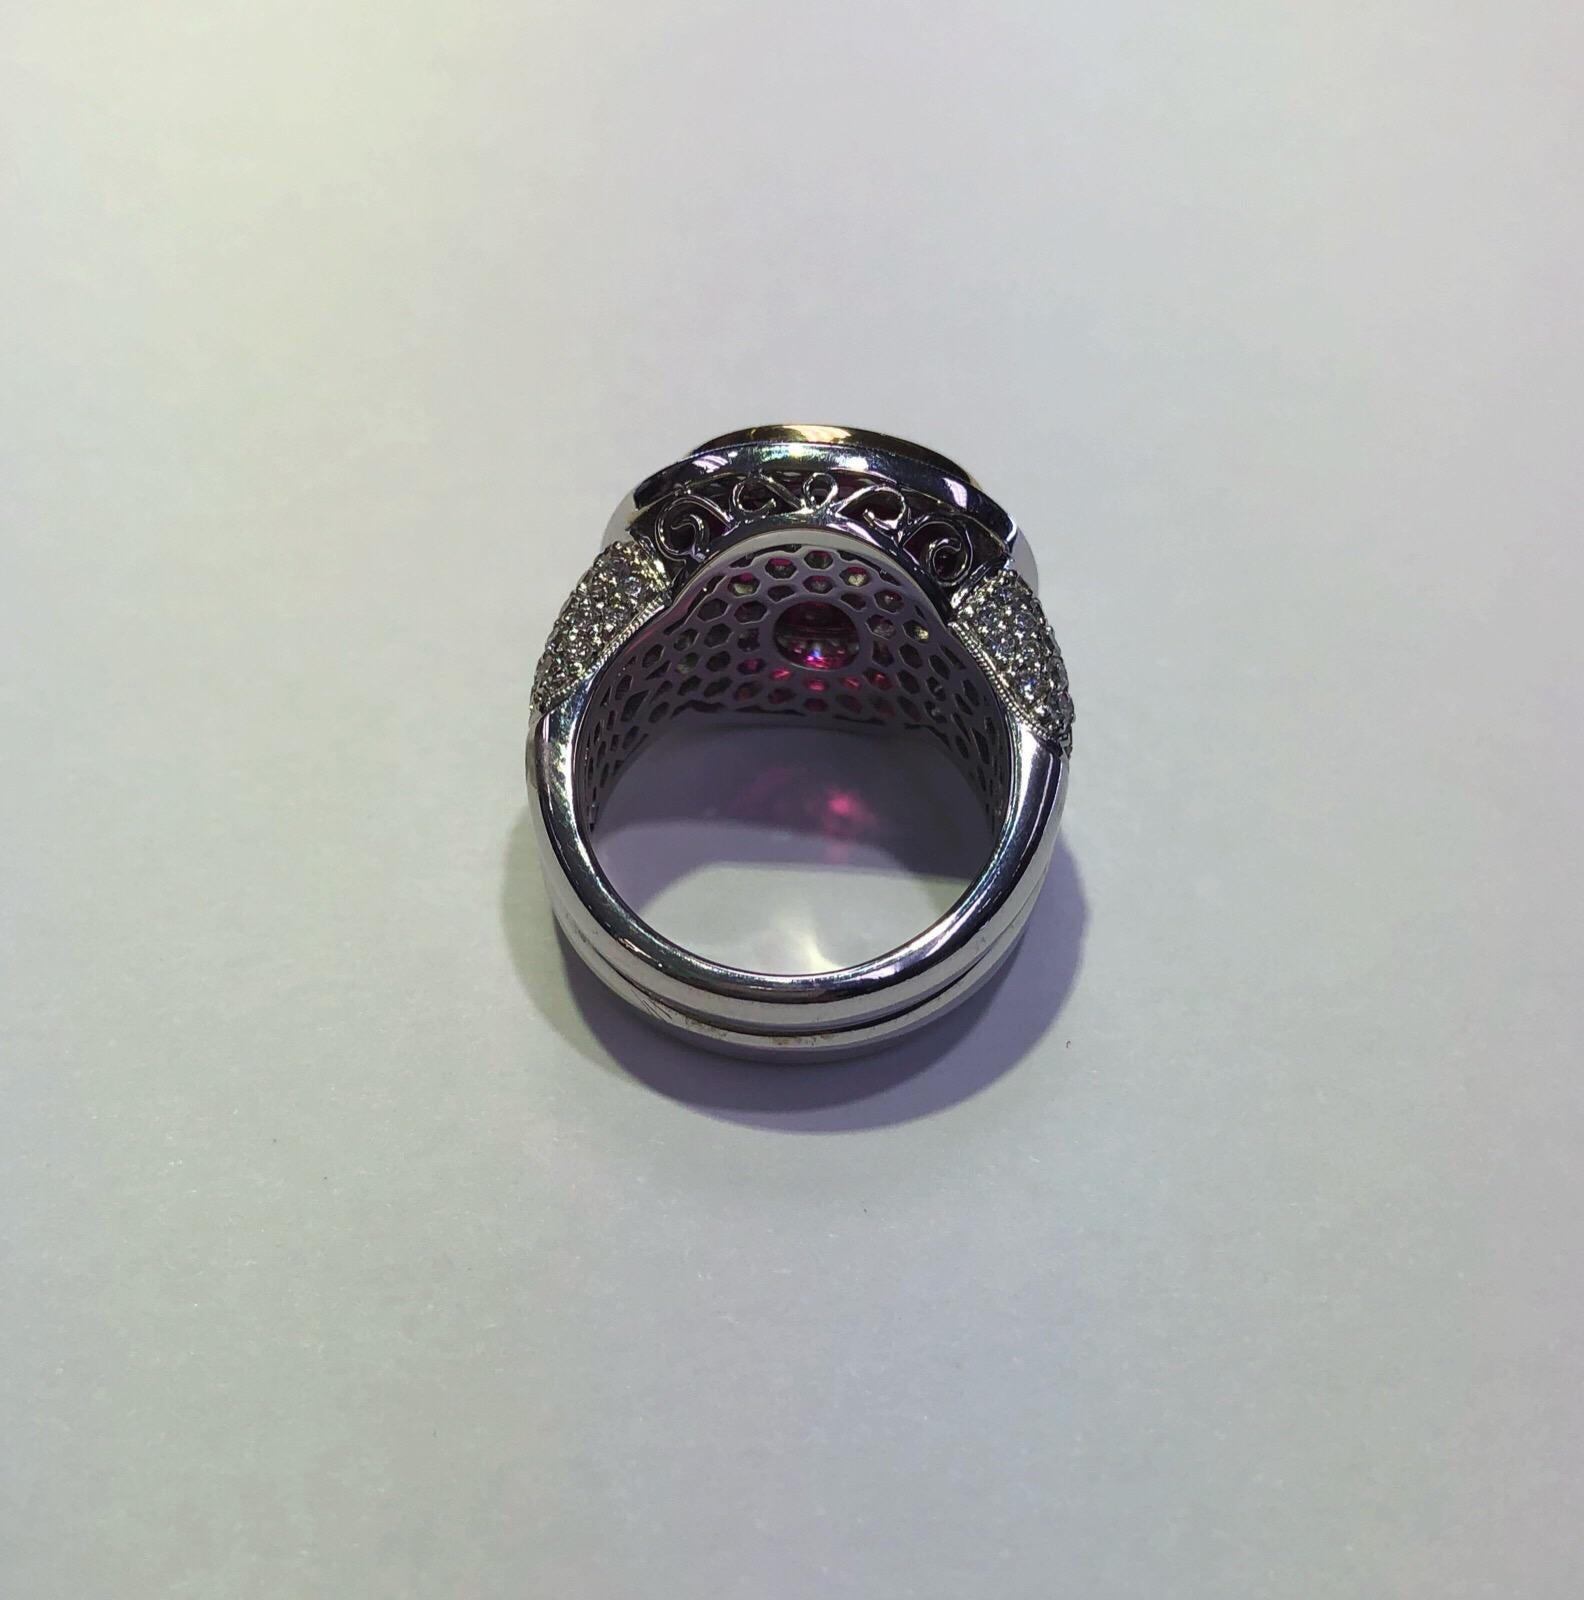 18k white and yellow gold Simon G ring set with one 5.98 carat oval cut rubelite center and 1.36 carats total weight of round brilliant diamonds. Ring size is 6.5 